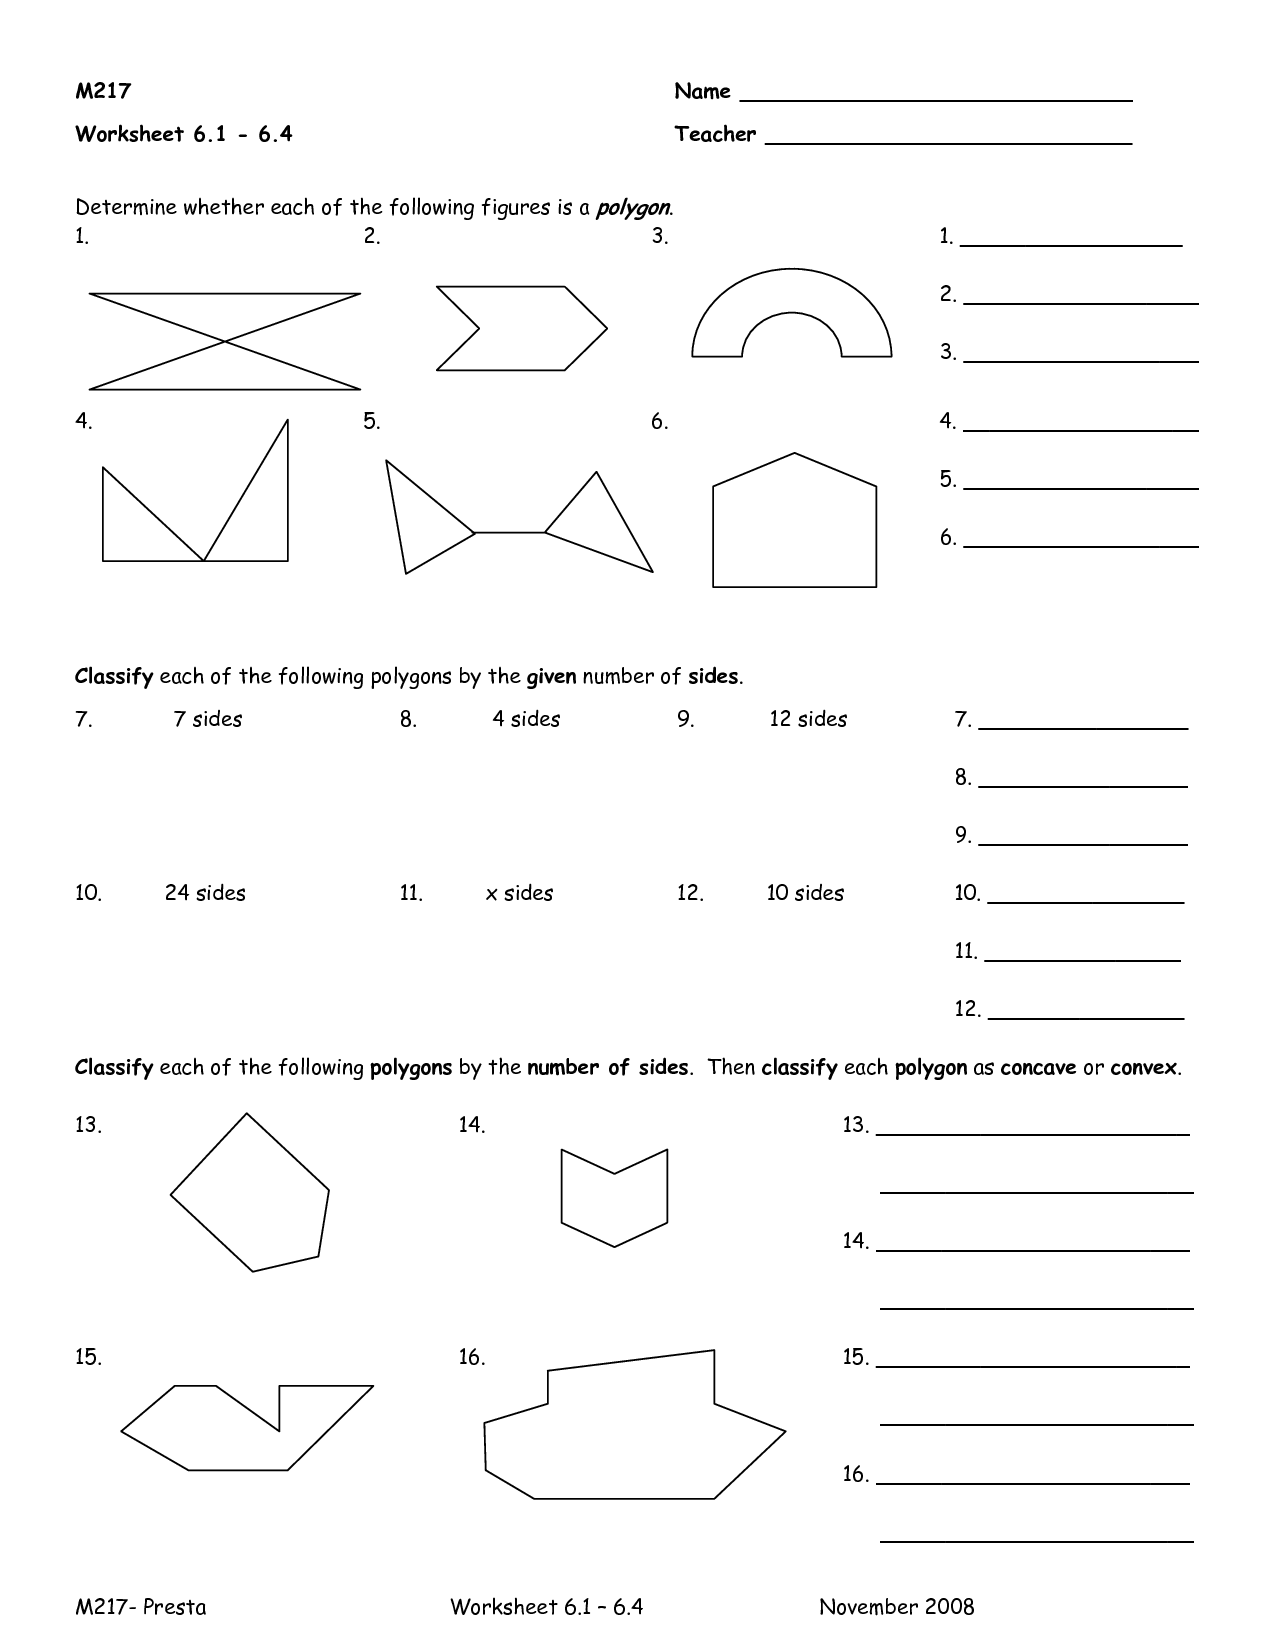 Concave and Convex Polygons Worksheets